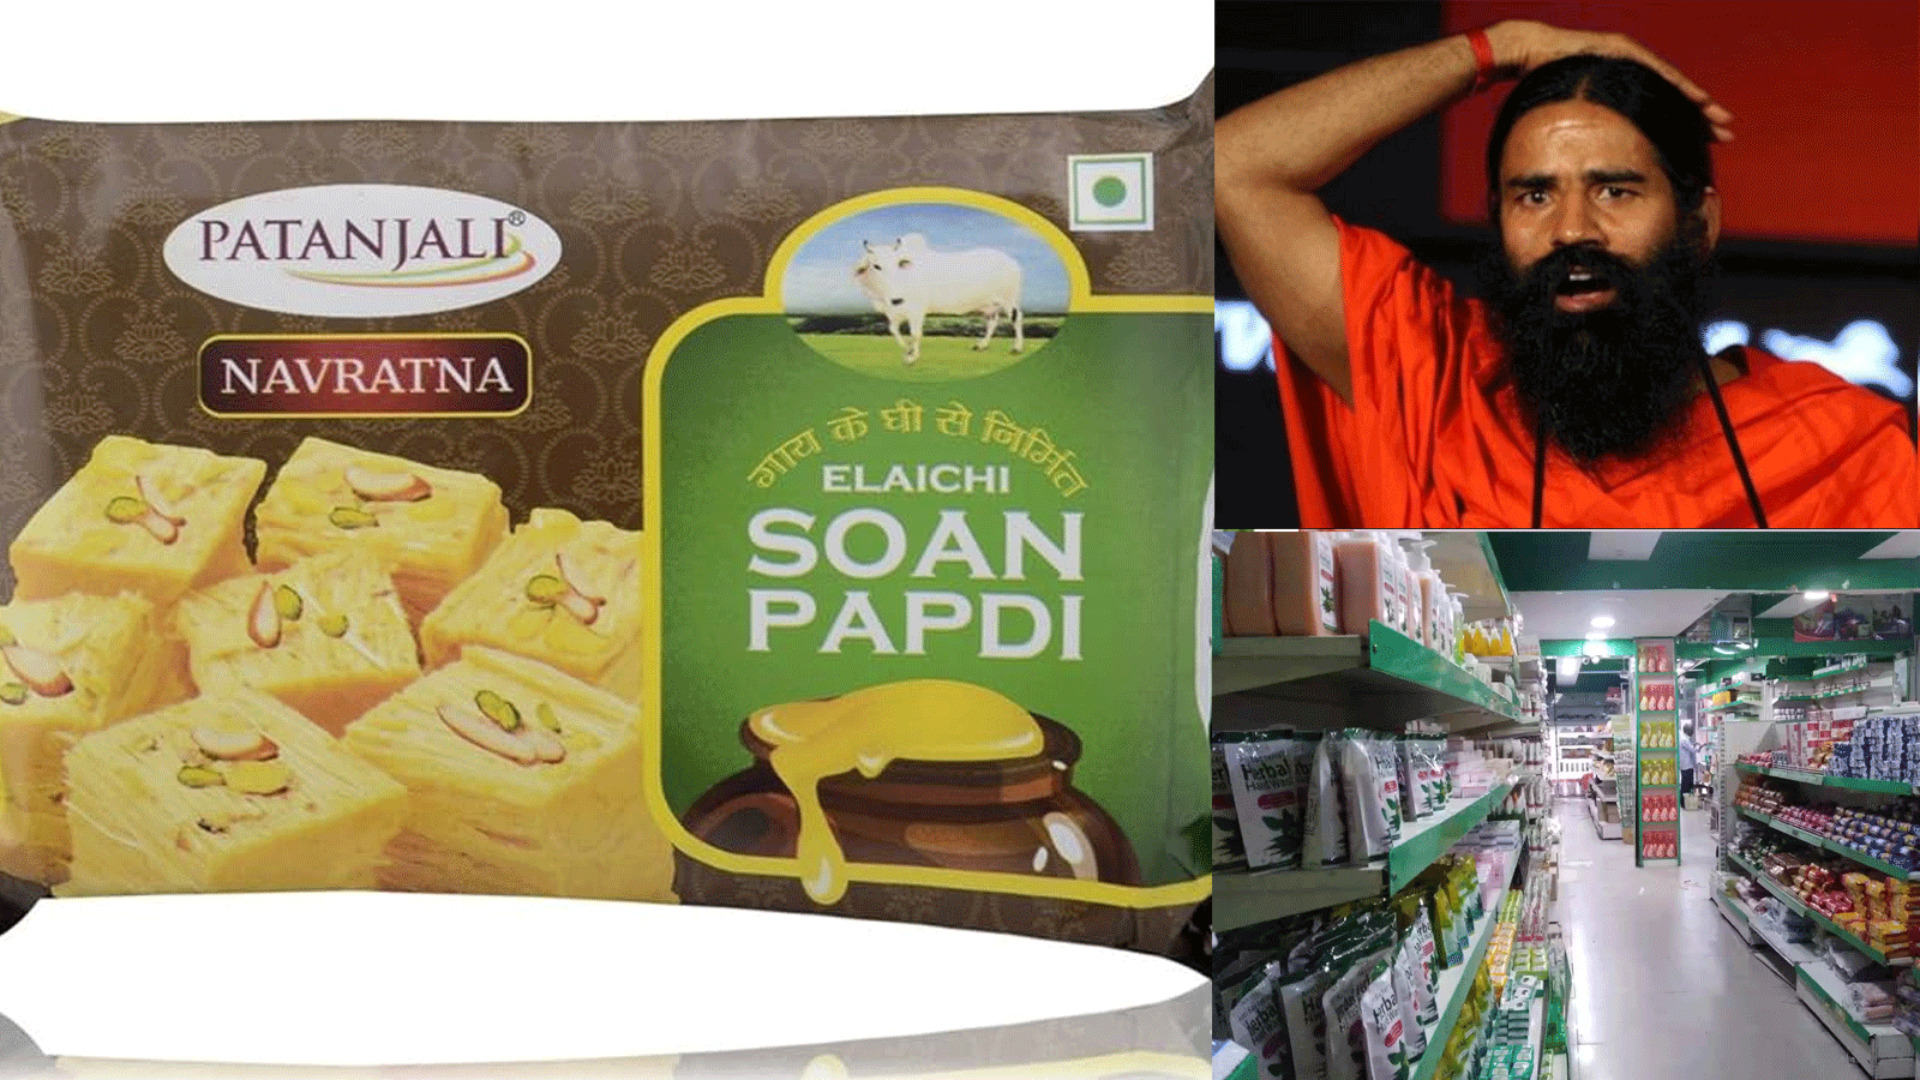 Patanjali’s Soan Papdi Fails Quality Test: Company Official and Two Others Arrested